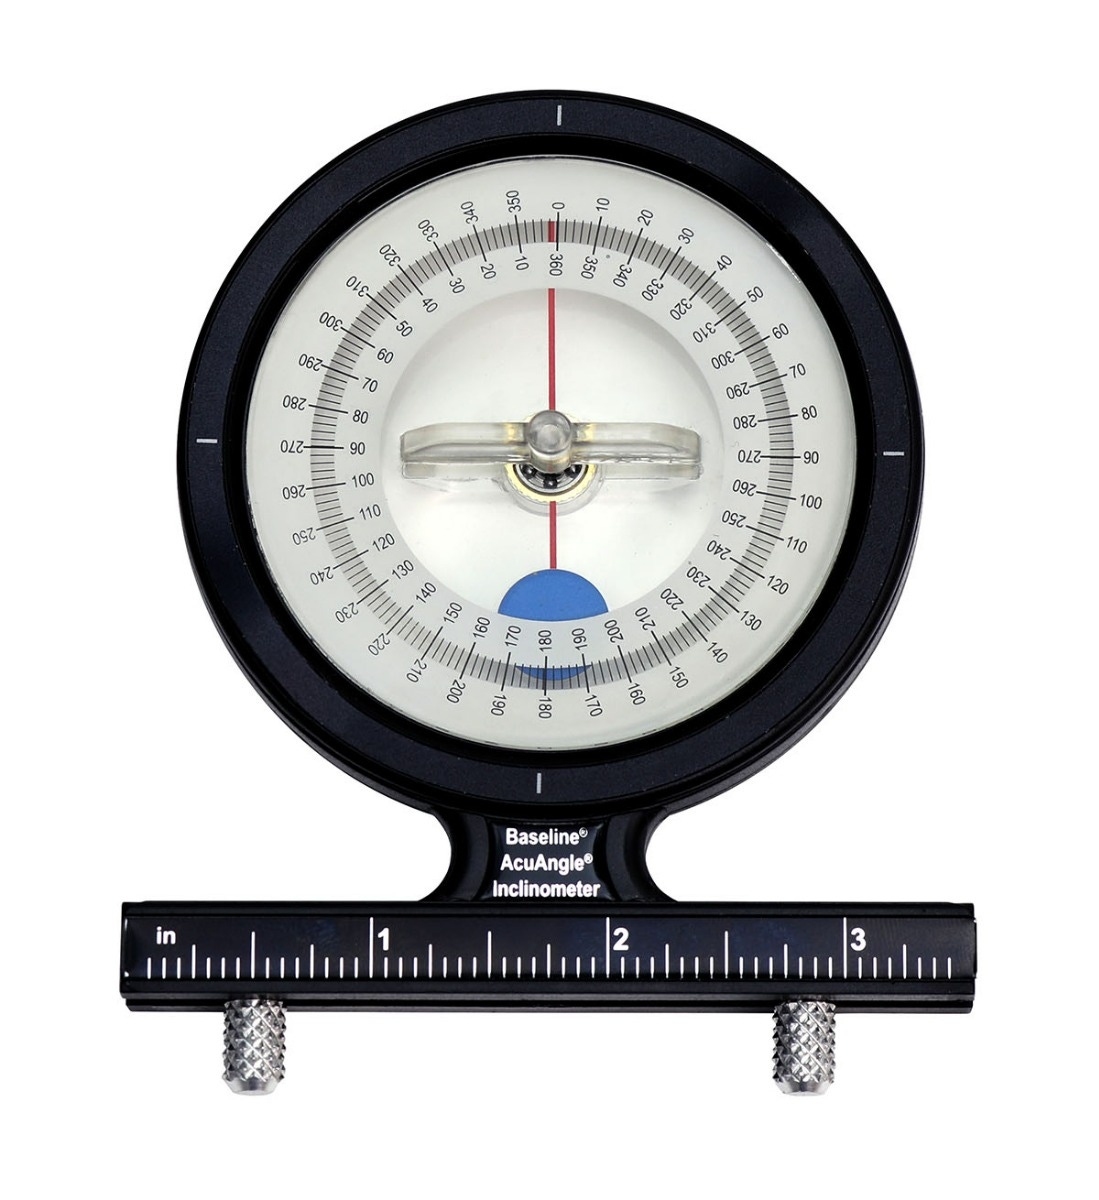 Baseline AccuAngle Goniometer